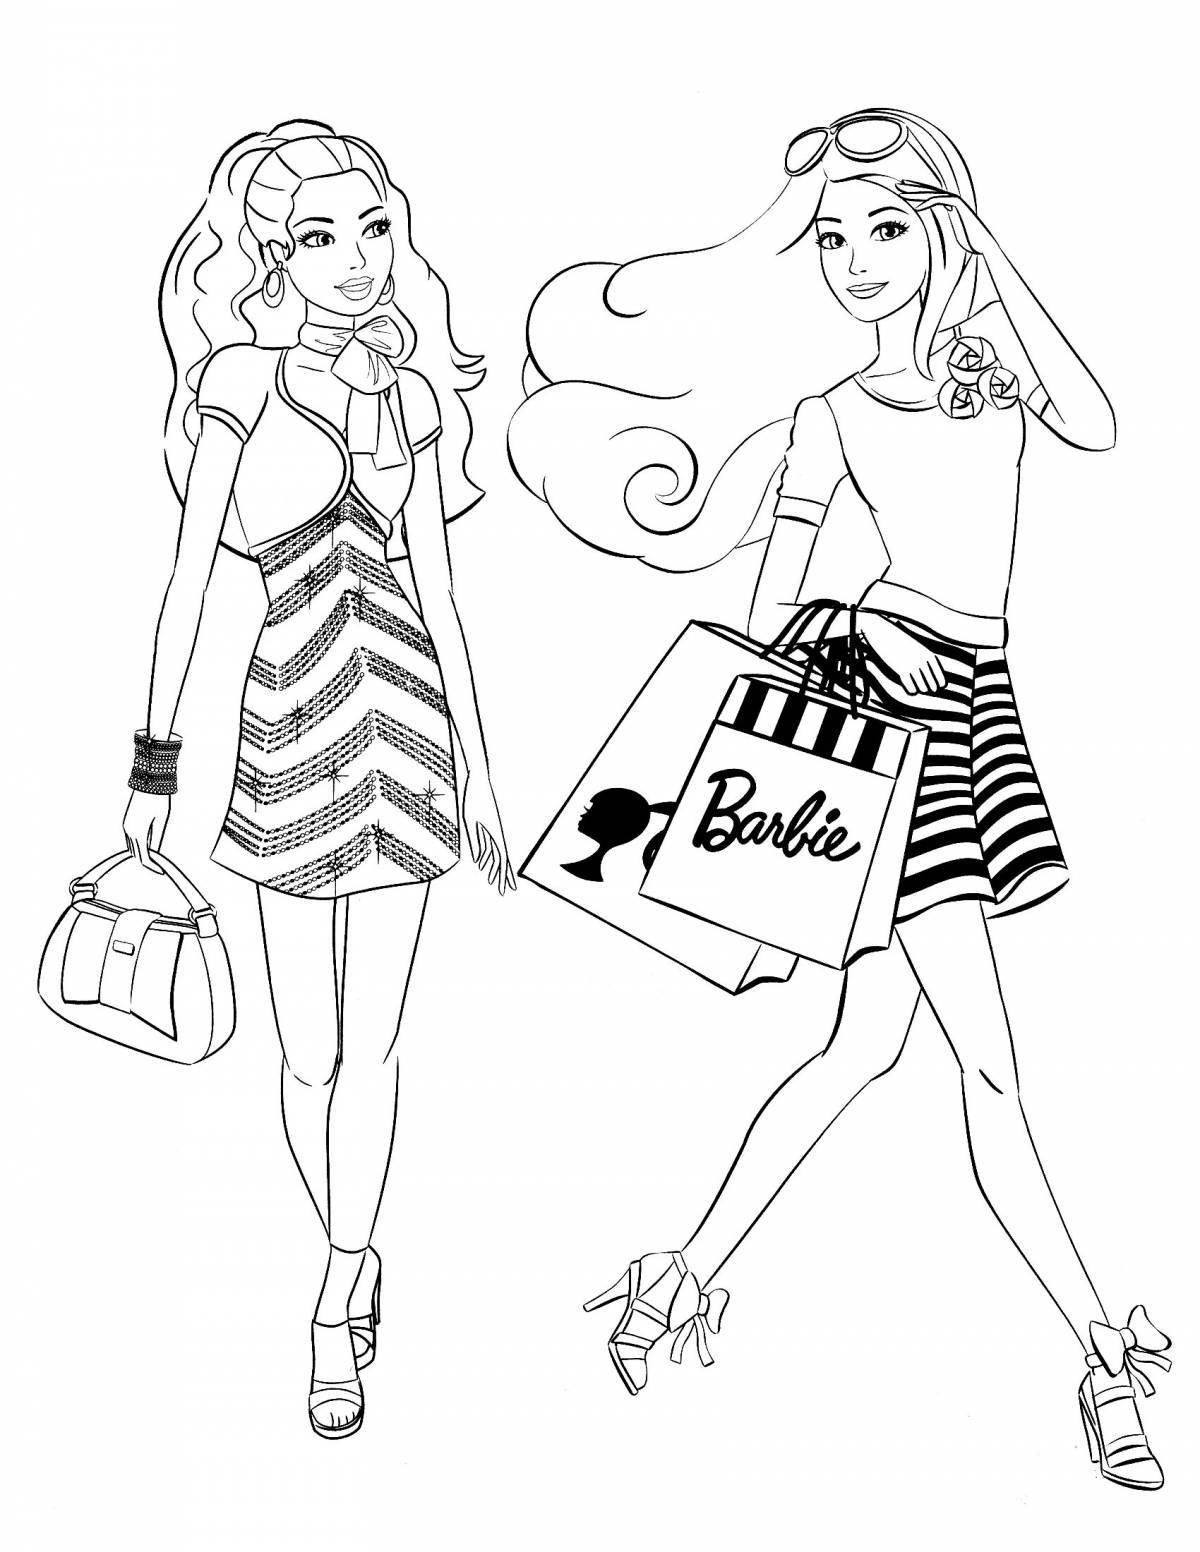 Awesome barbie doll coloring pages